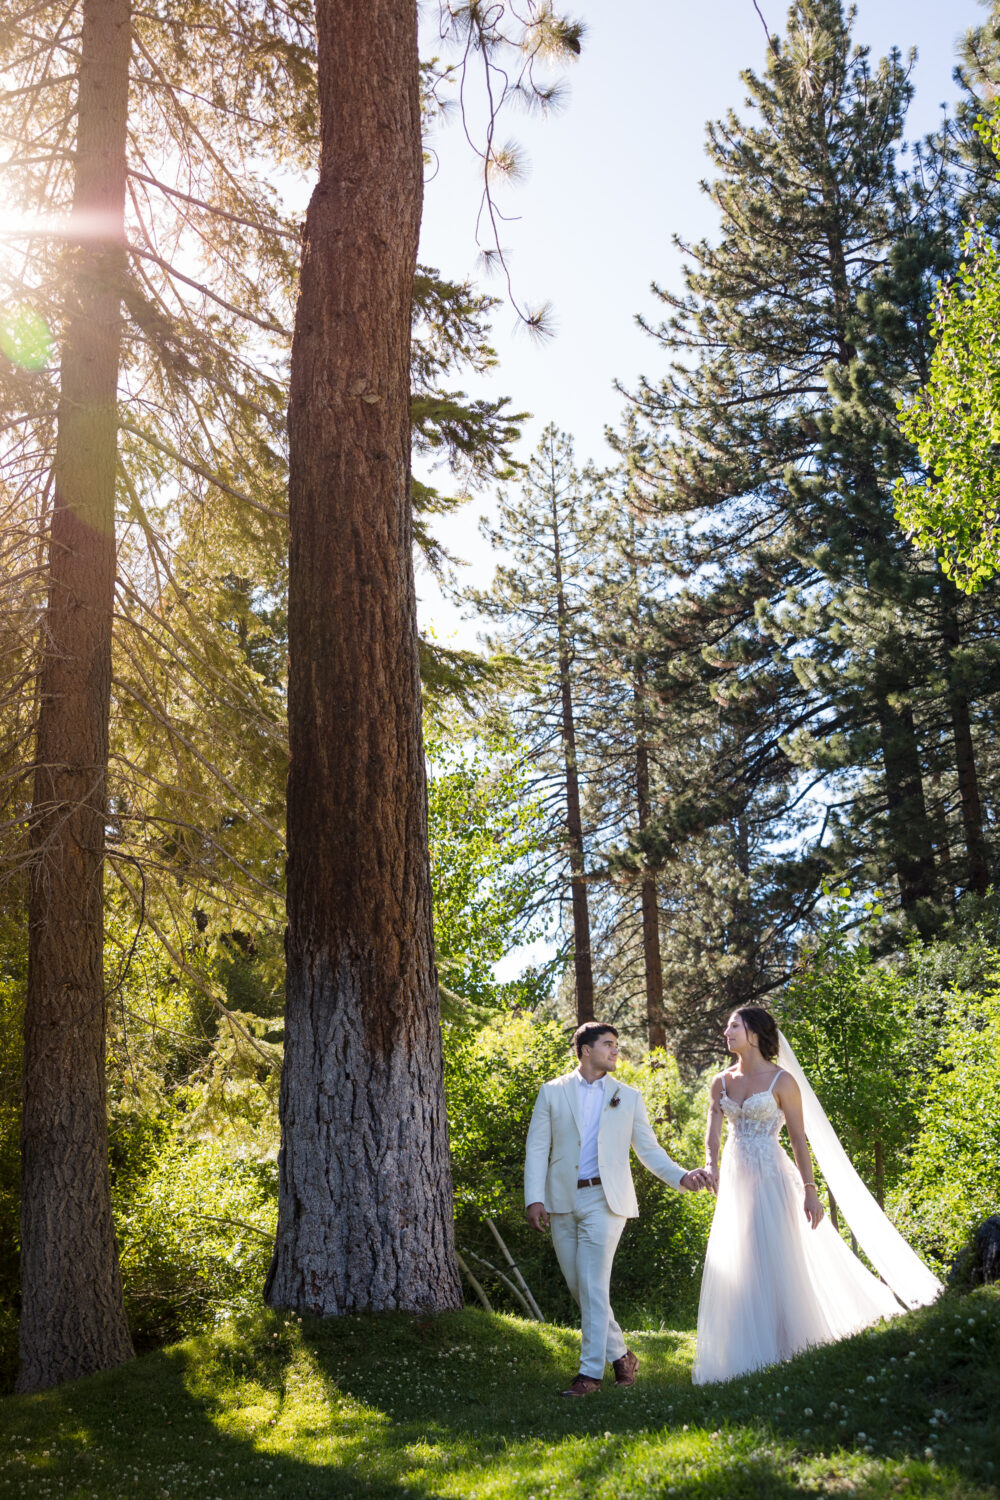 The bride and groom take a walk for their sunset photos at Aspen Grove in Incline Village.